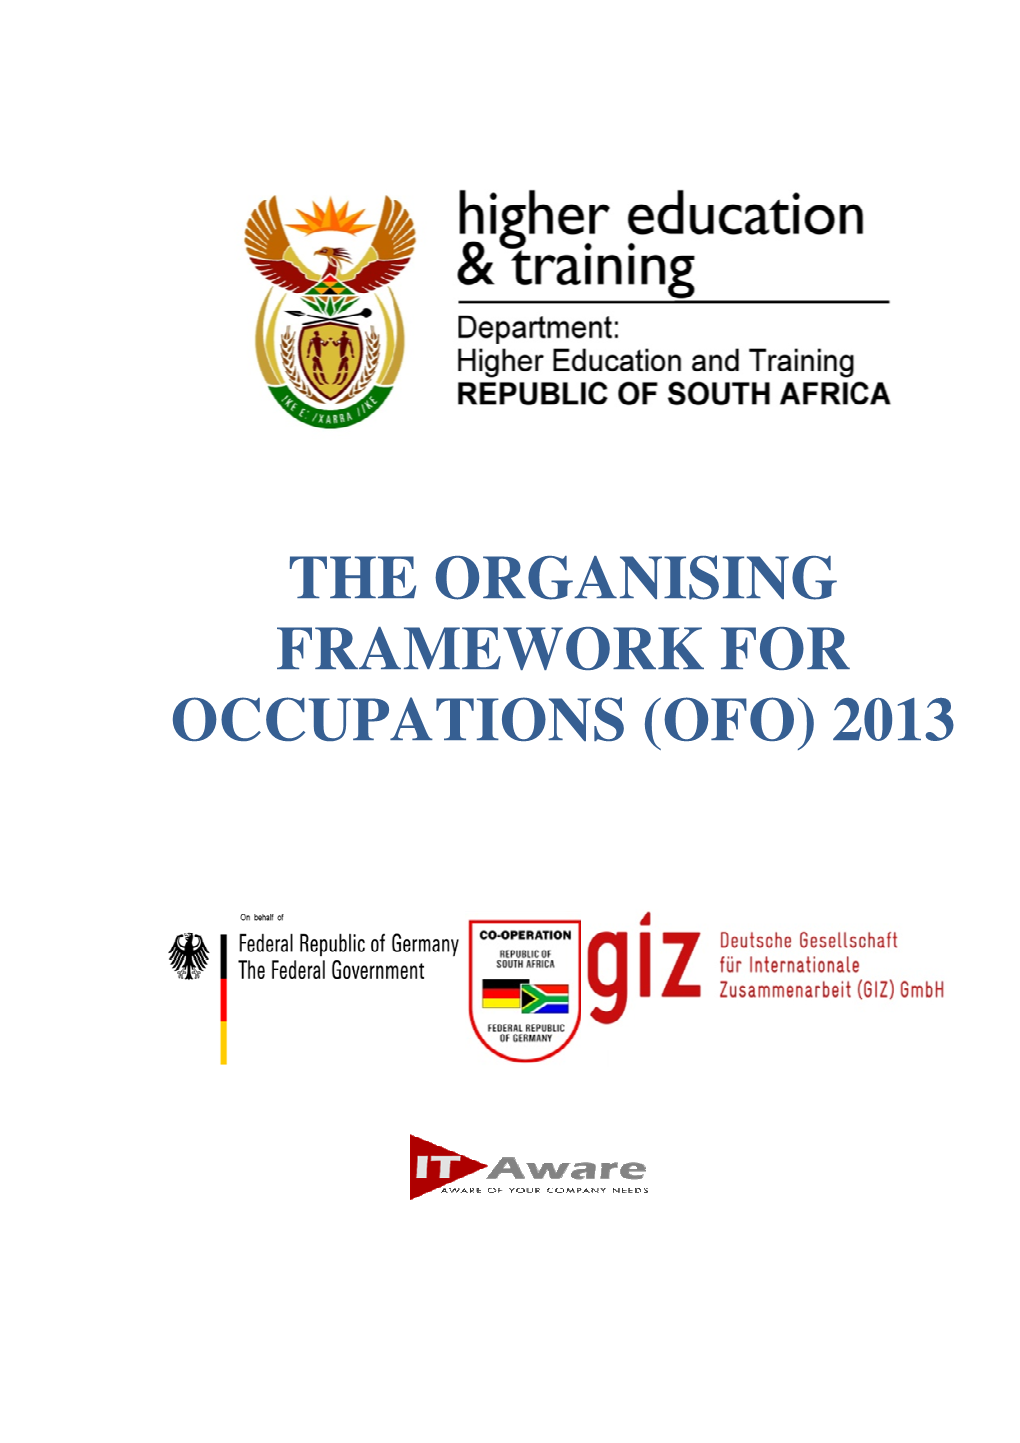 The Organising Framework for Occupations (Ofo) 2013